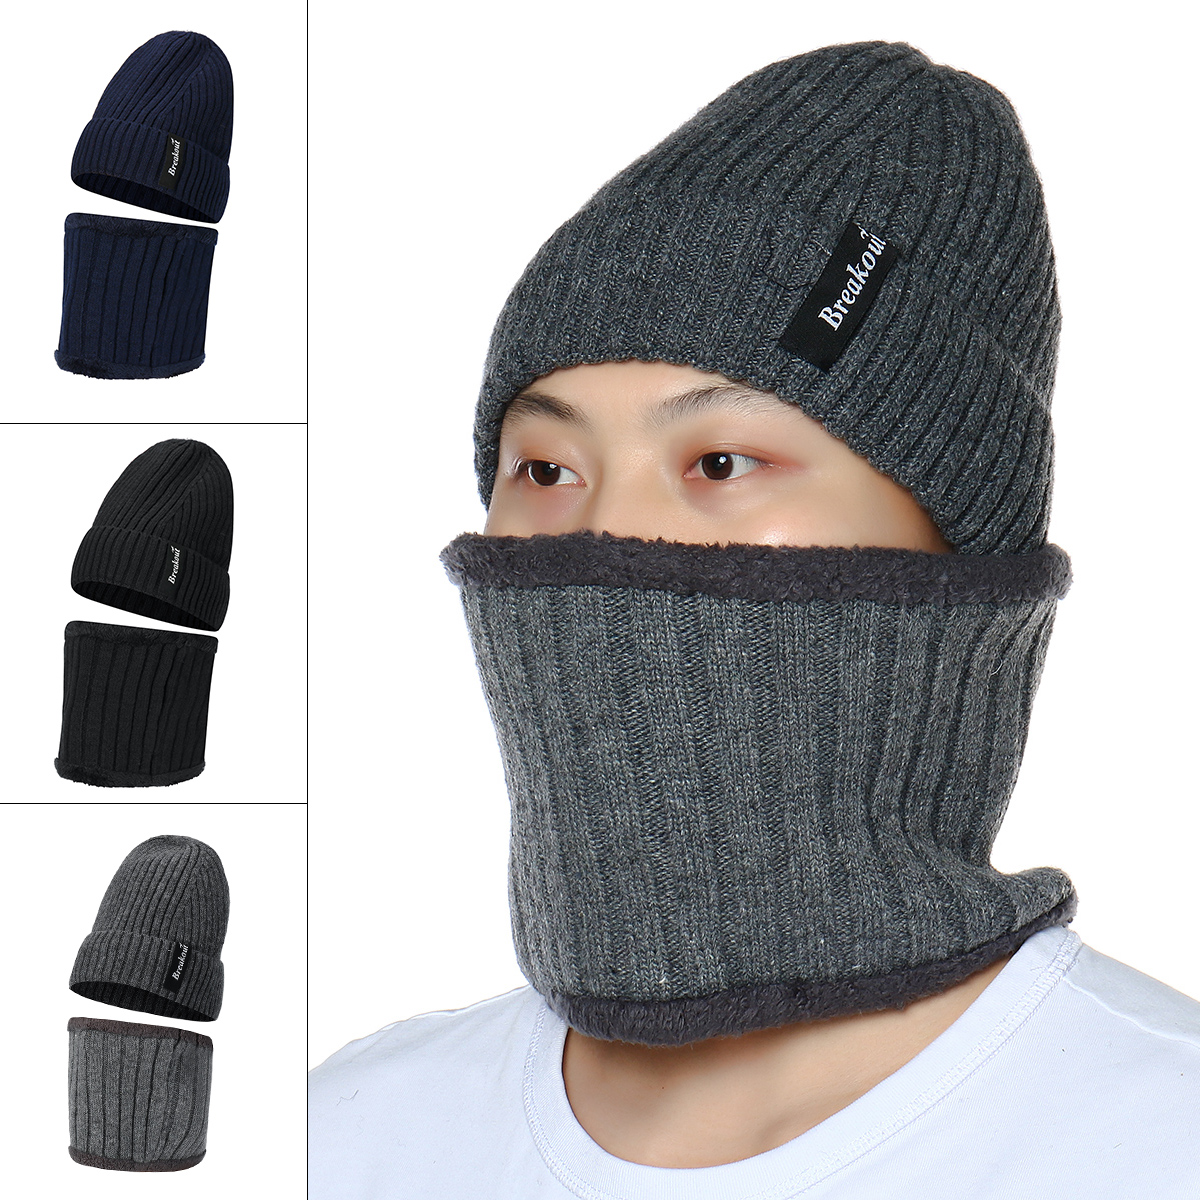 Details about   2Pcs Unisex USB Heating Heated Head Neck Face Hat Cap Scarf Winter Warm 